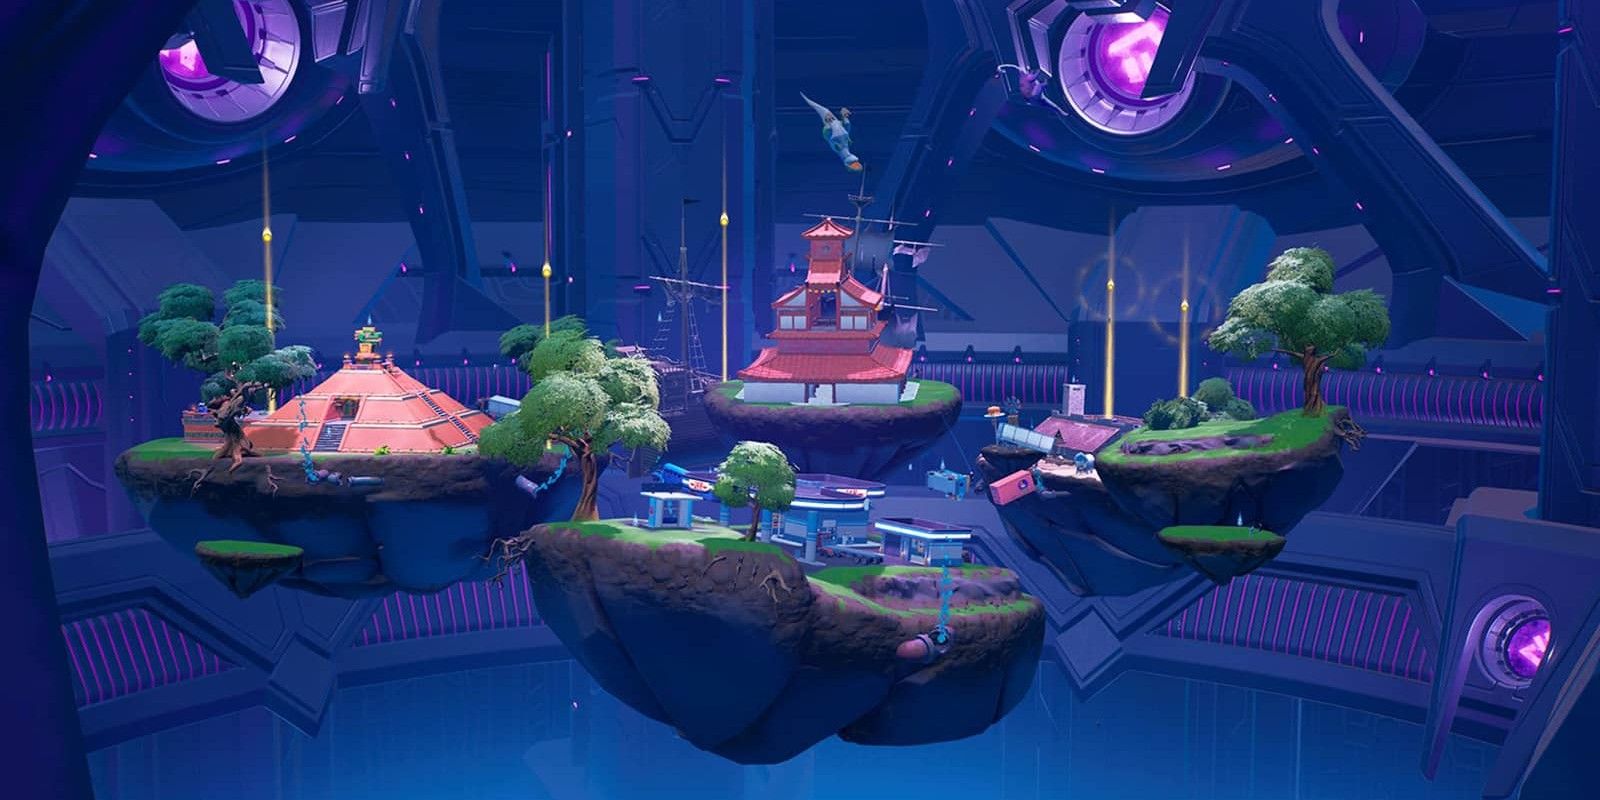 The interior of the Mothership in Fortnite Season 7